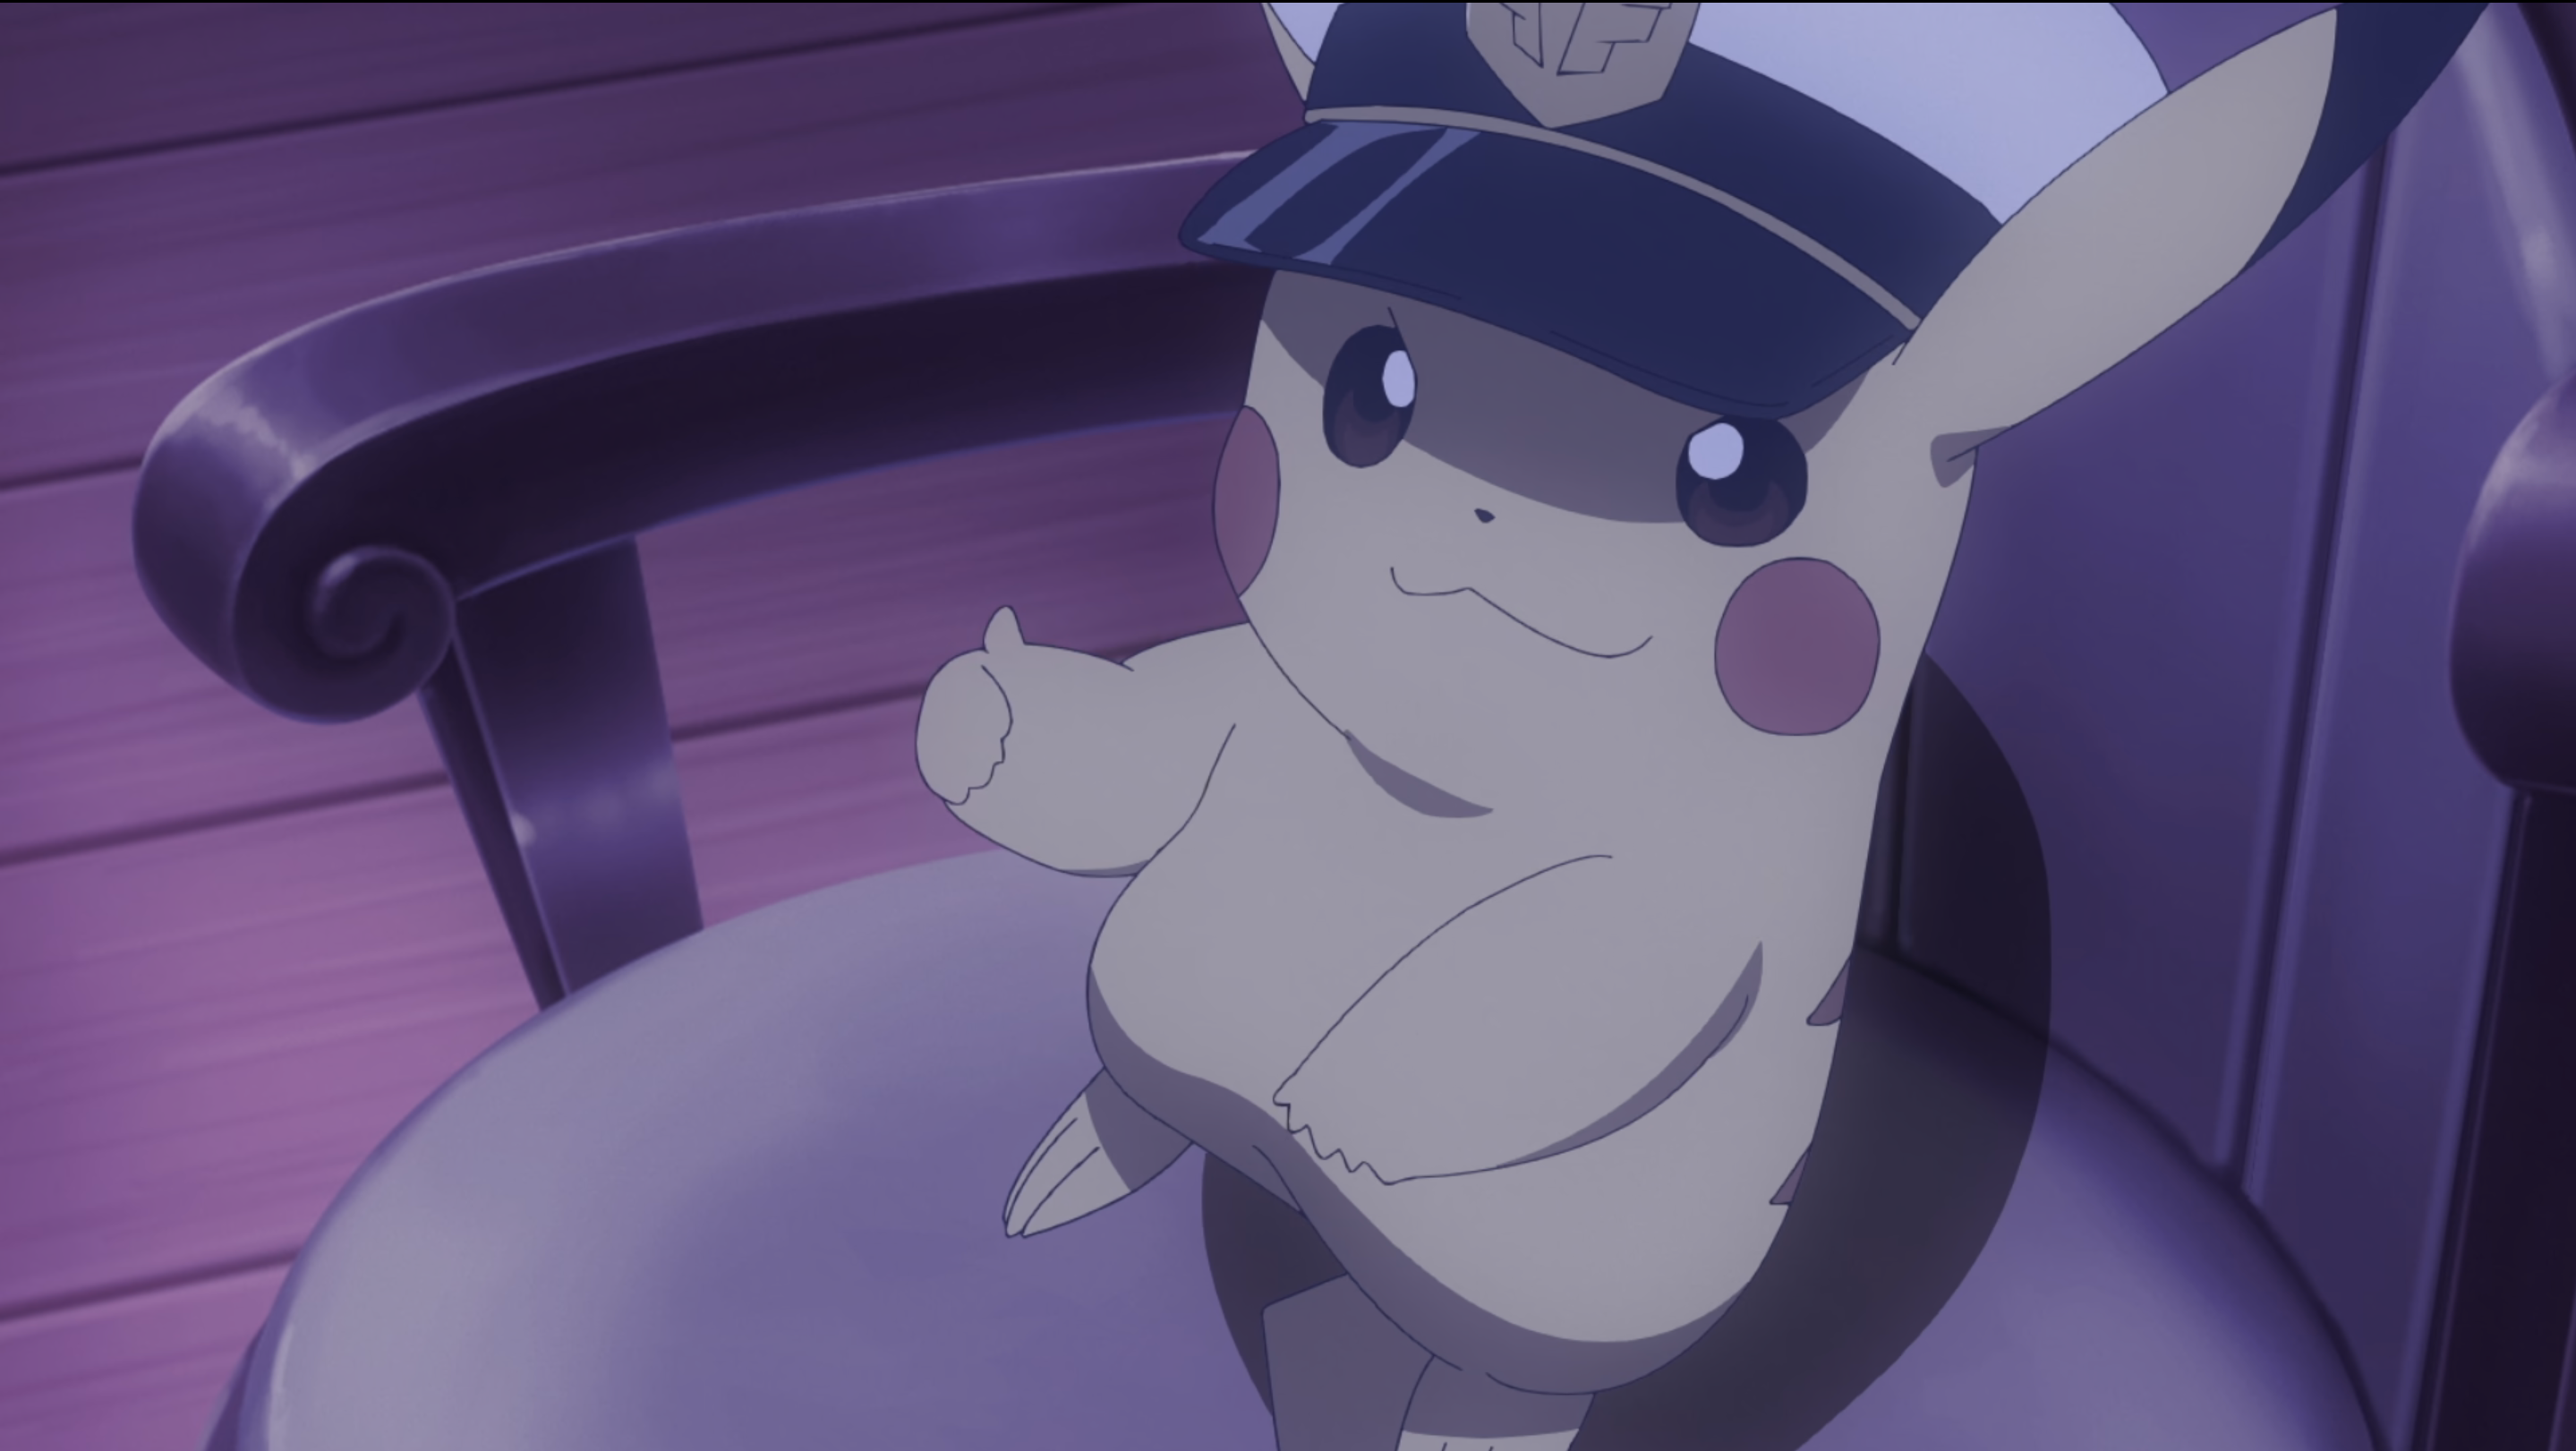 A Pikachu with a captain hat giving a thumbs up in a still from Pokémon Horizons